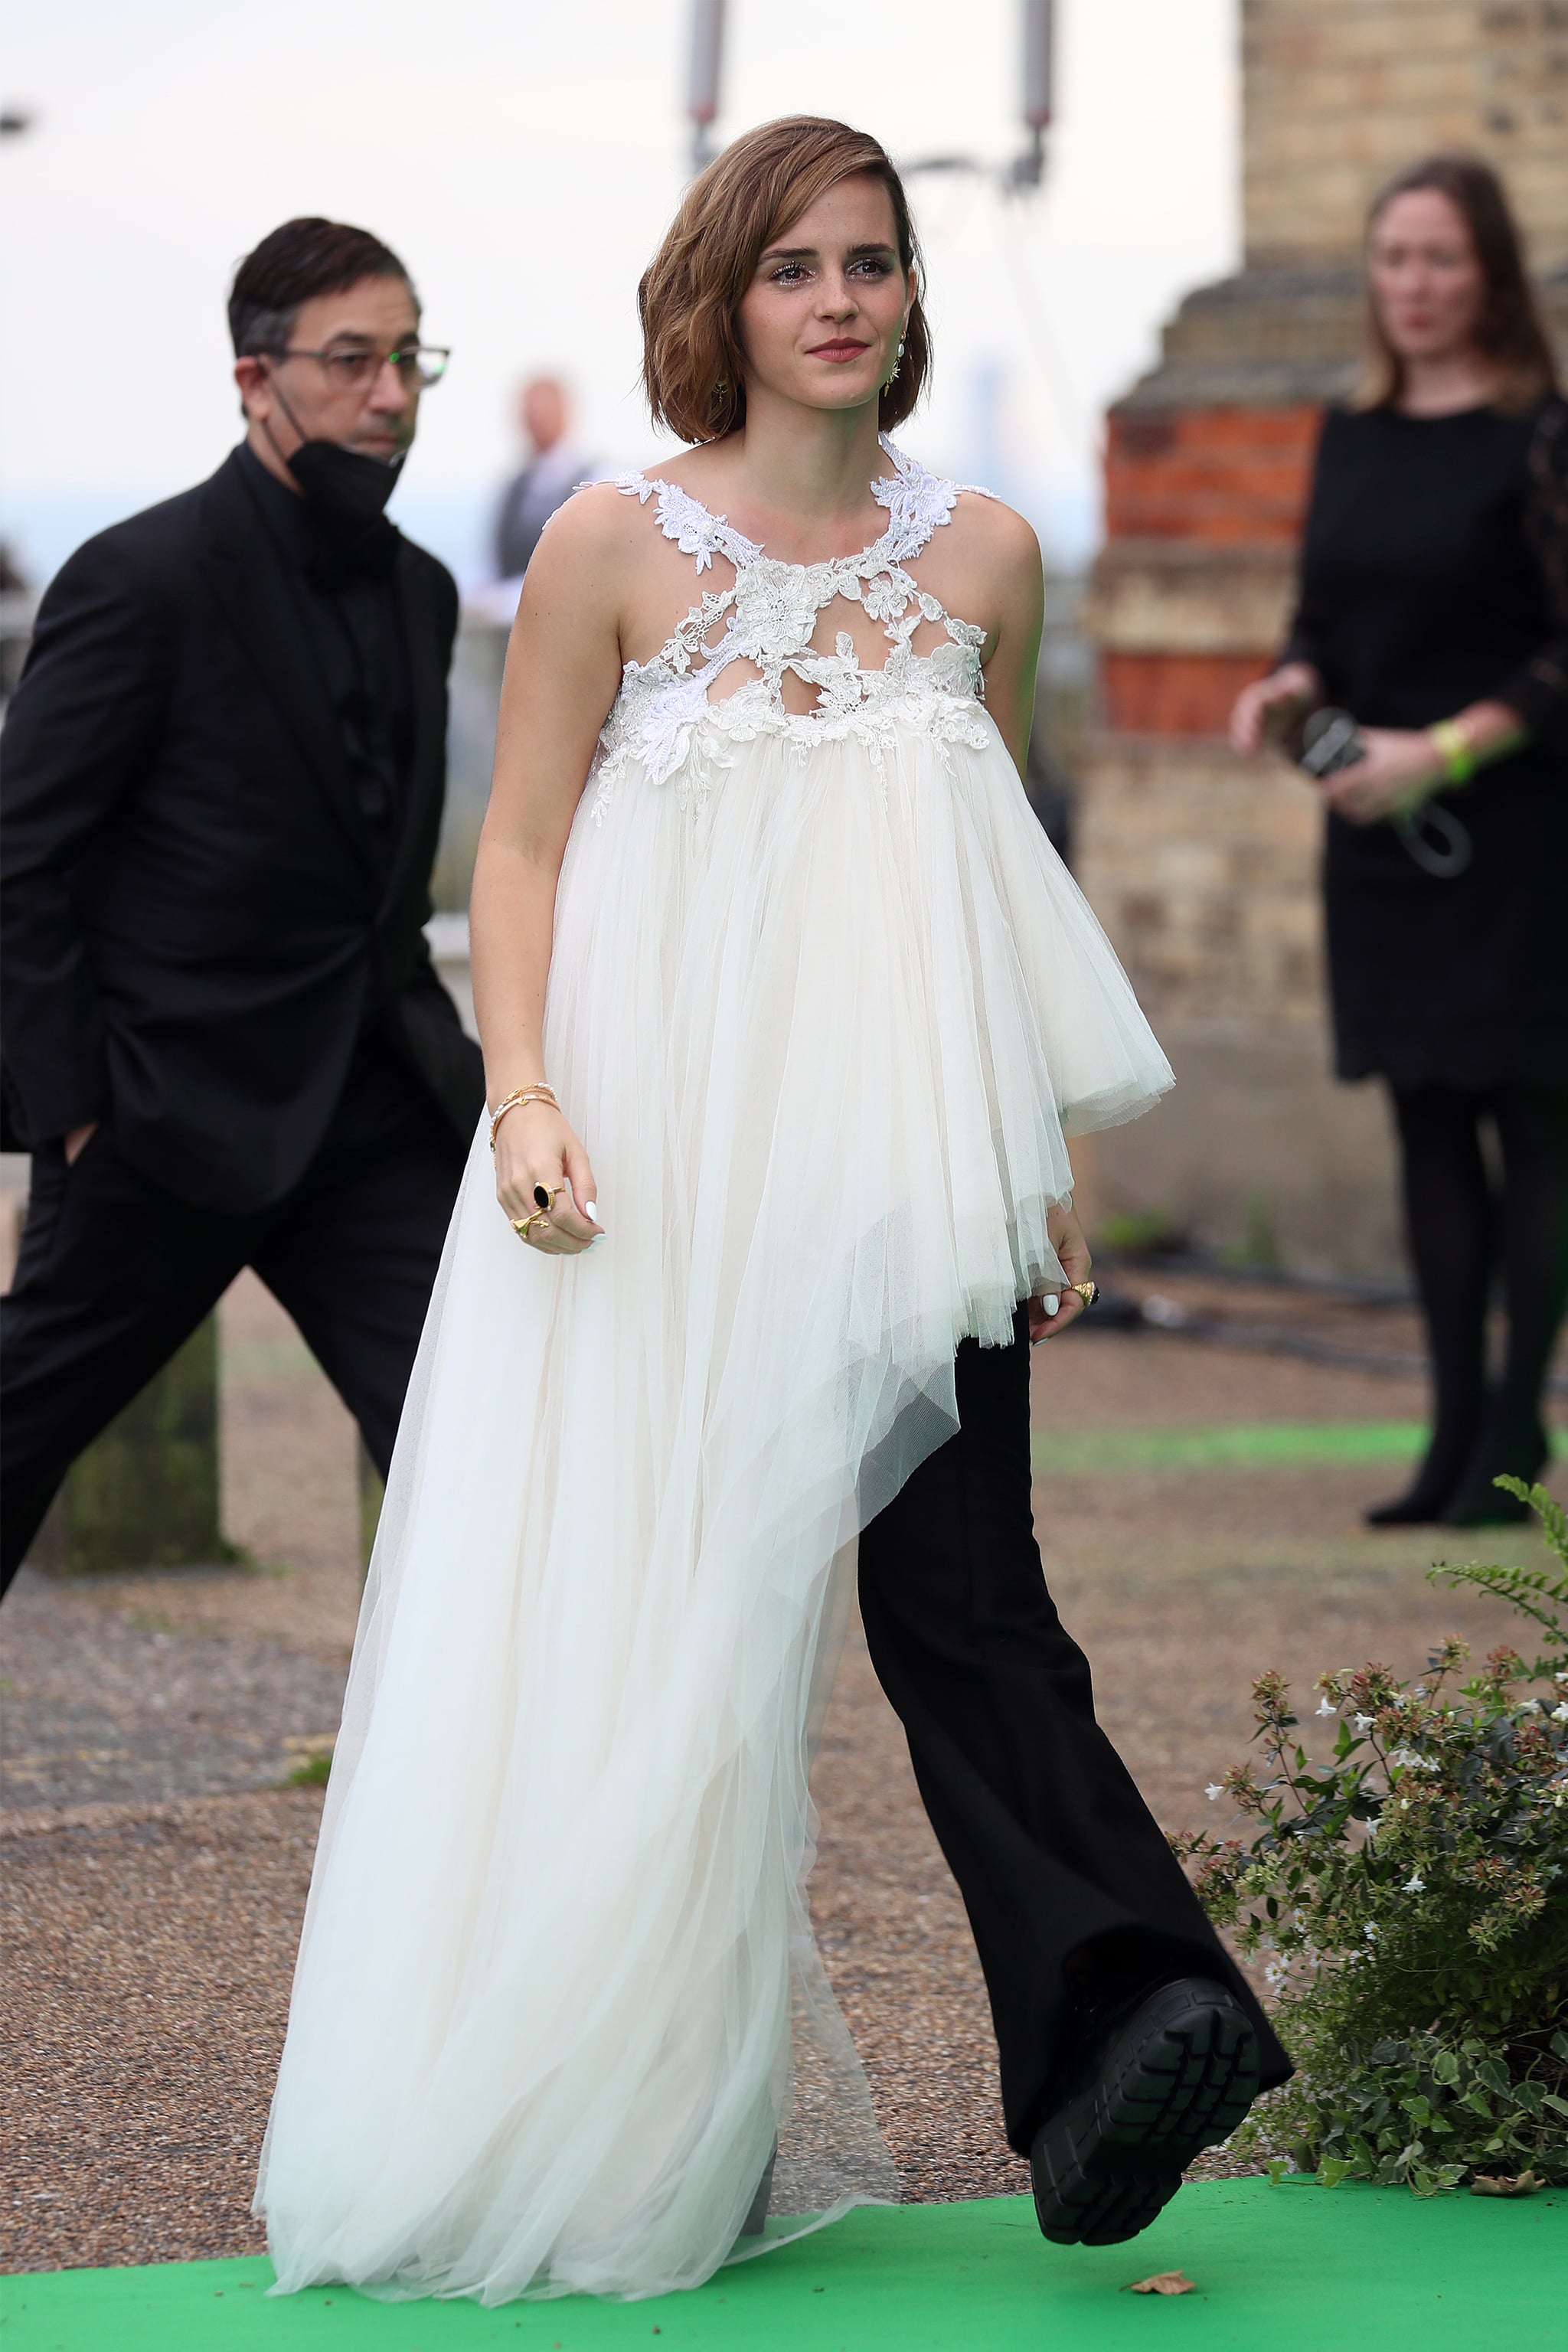 Emma Watson Rocks Recycled Wedding Dresses For Red Carpet Appearance ...